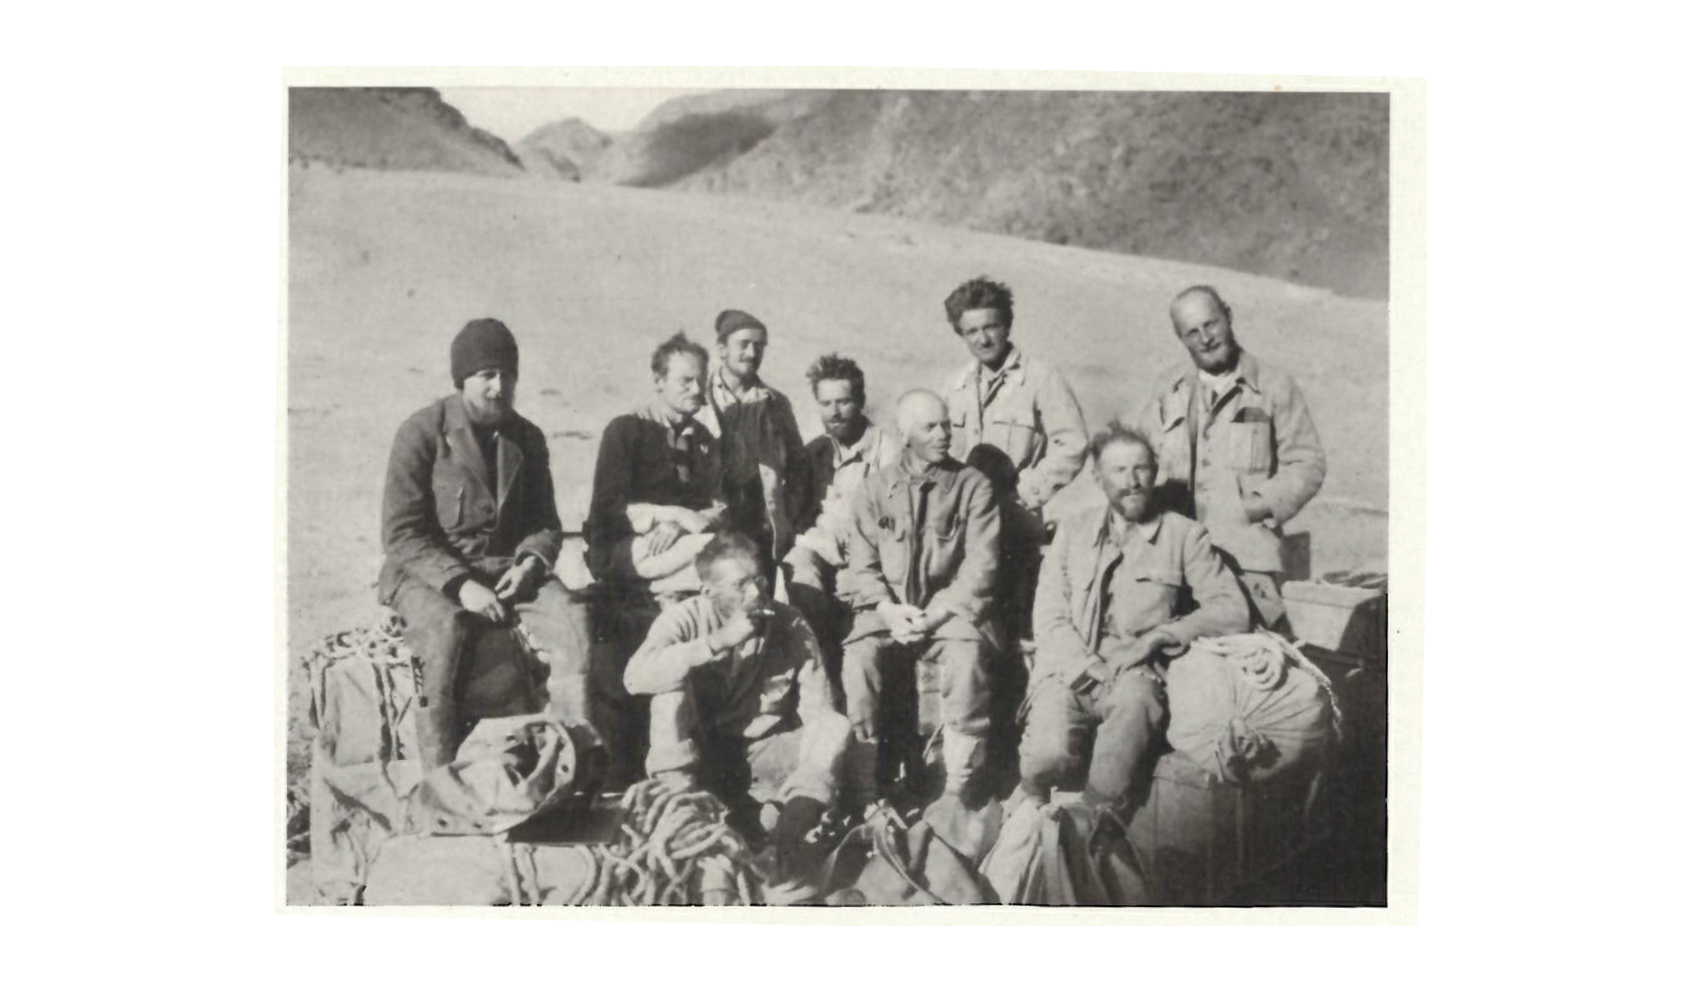 The expedition members